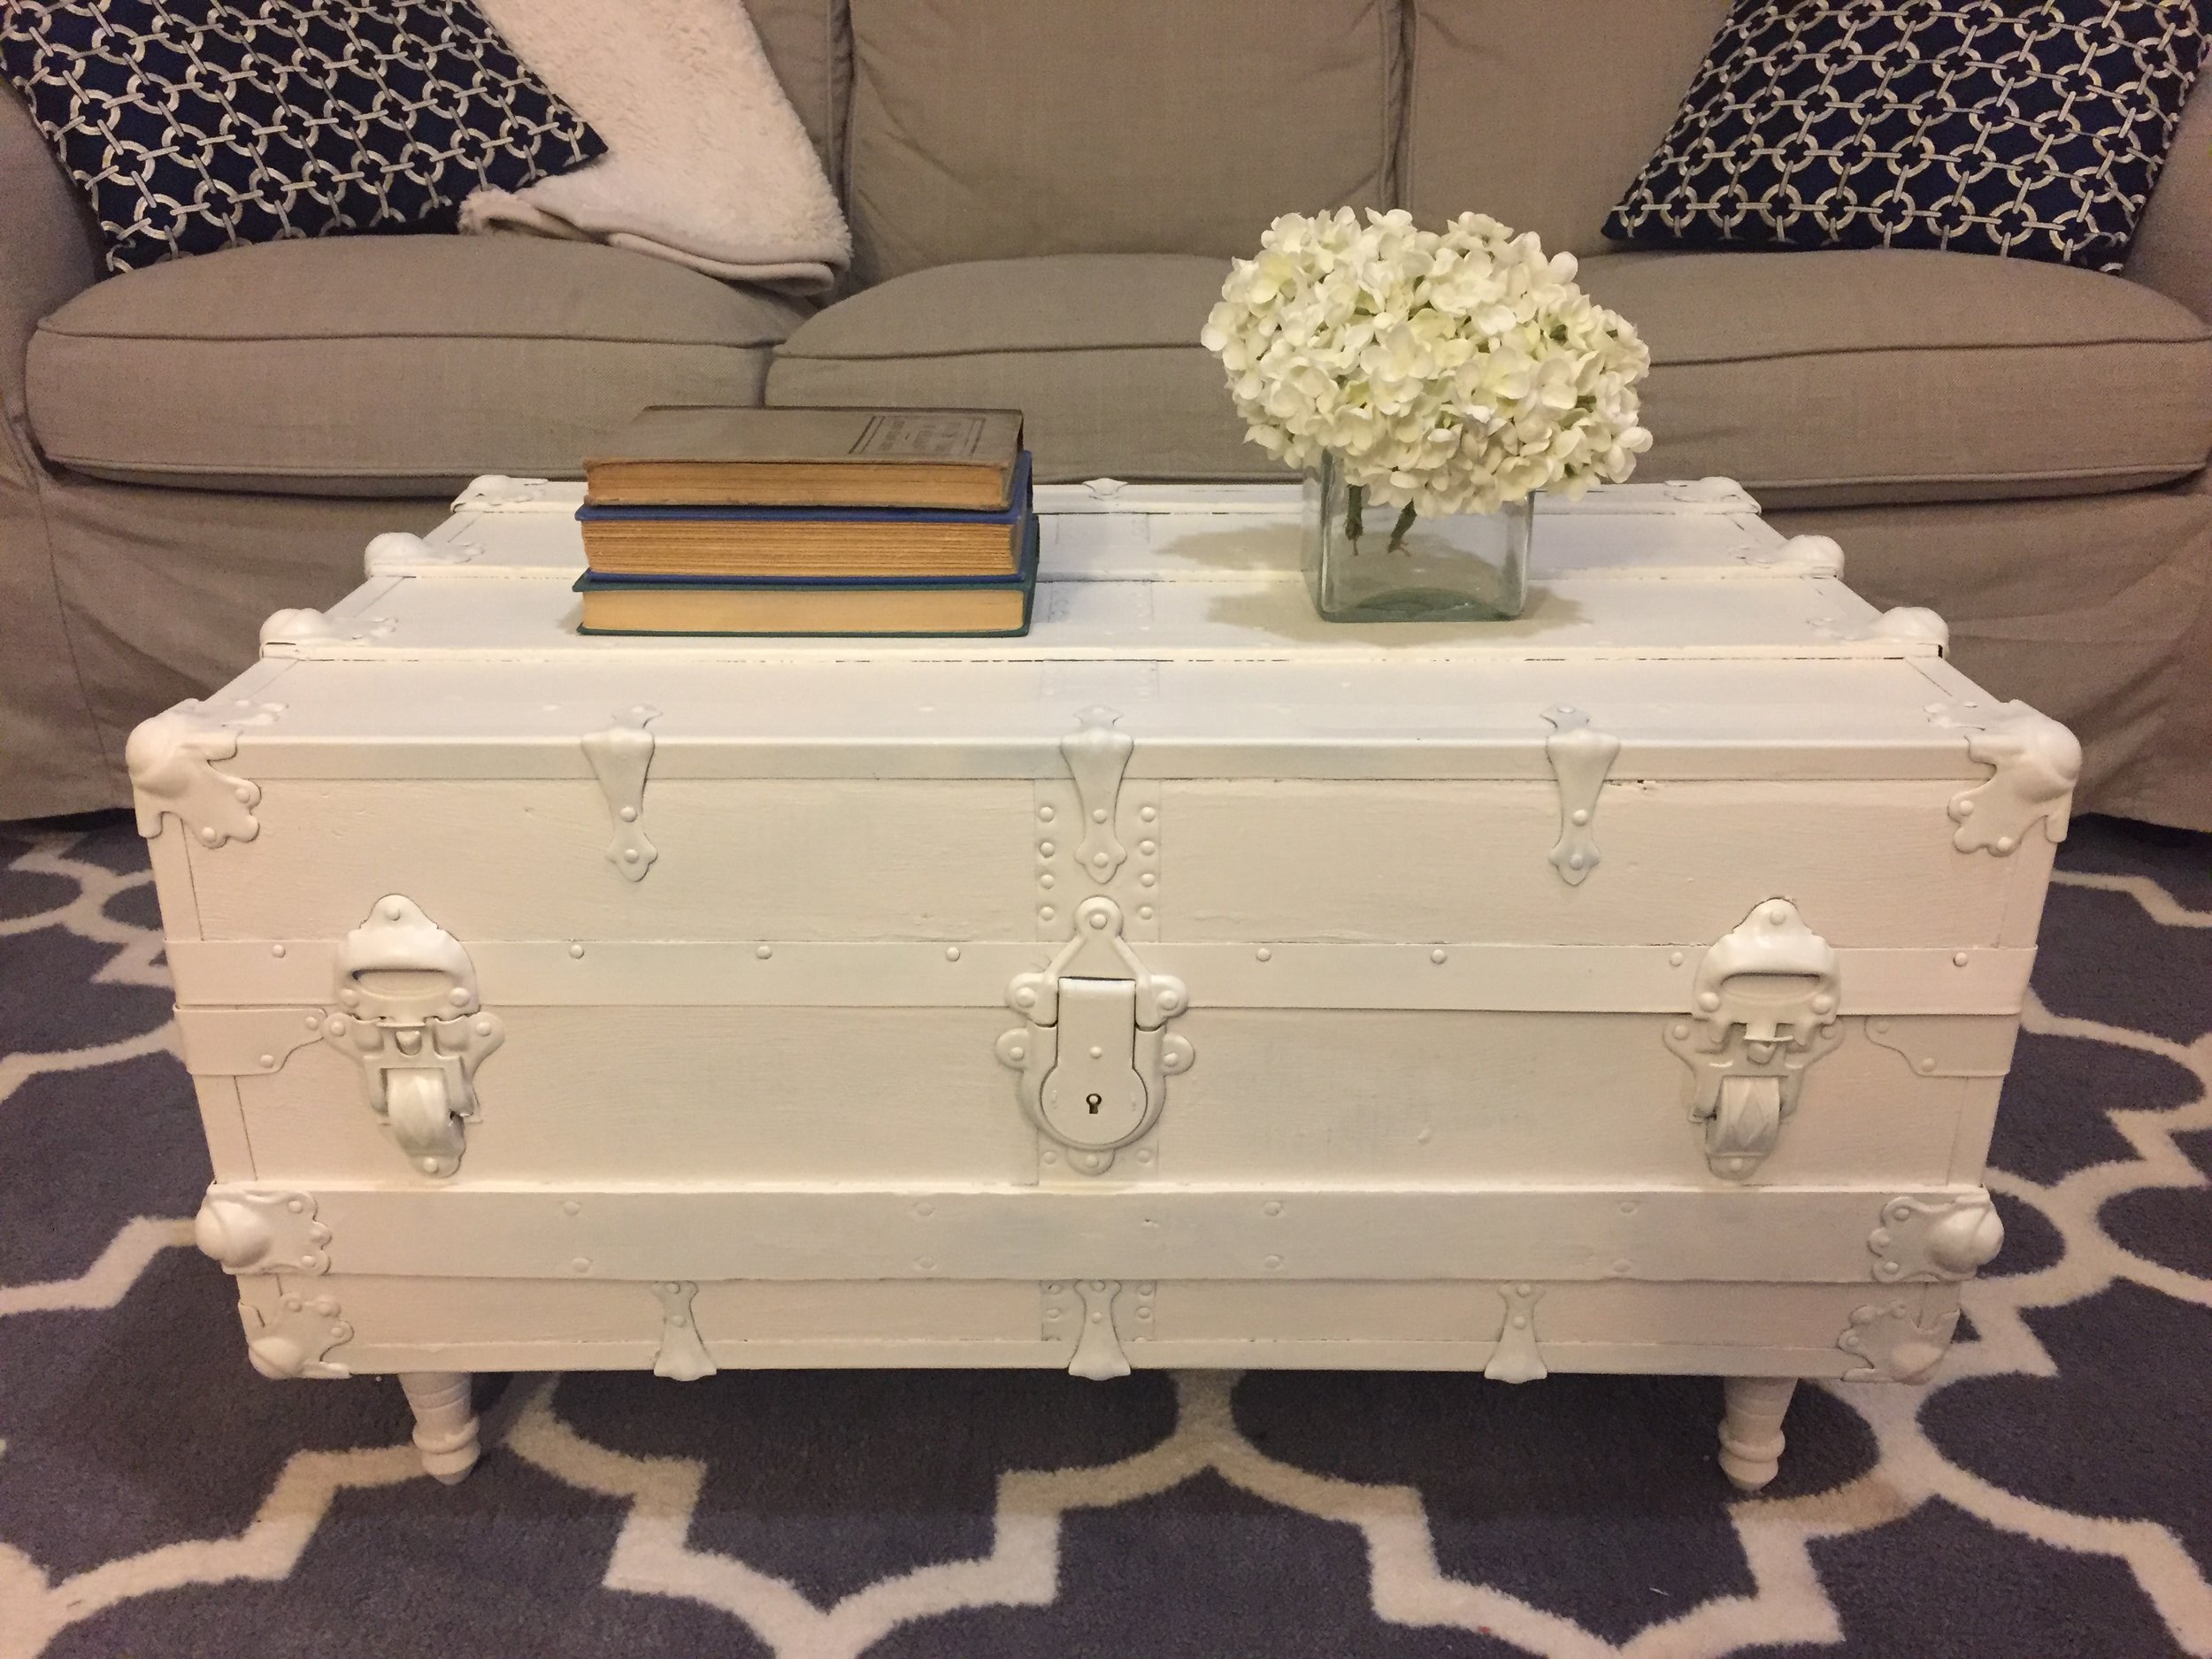 Diy Vintage Steamer Trunk Coffee Table, How To Turn An Old Trunk Into A Coffee Table